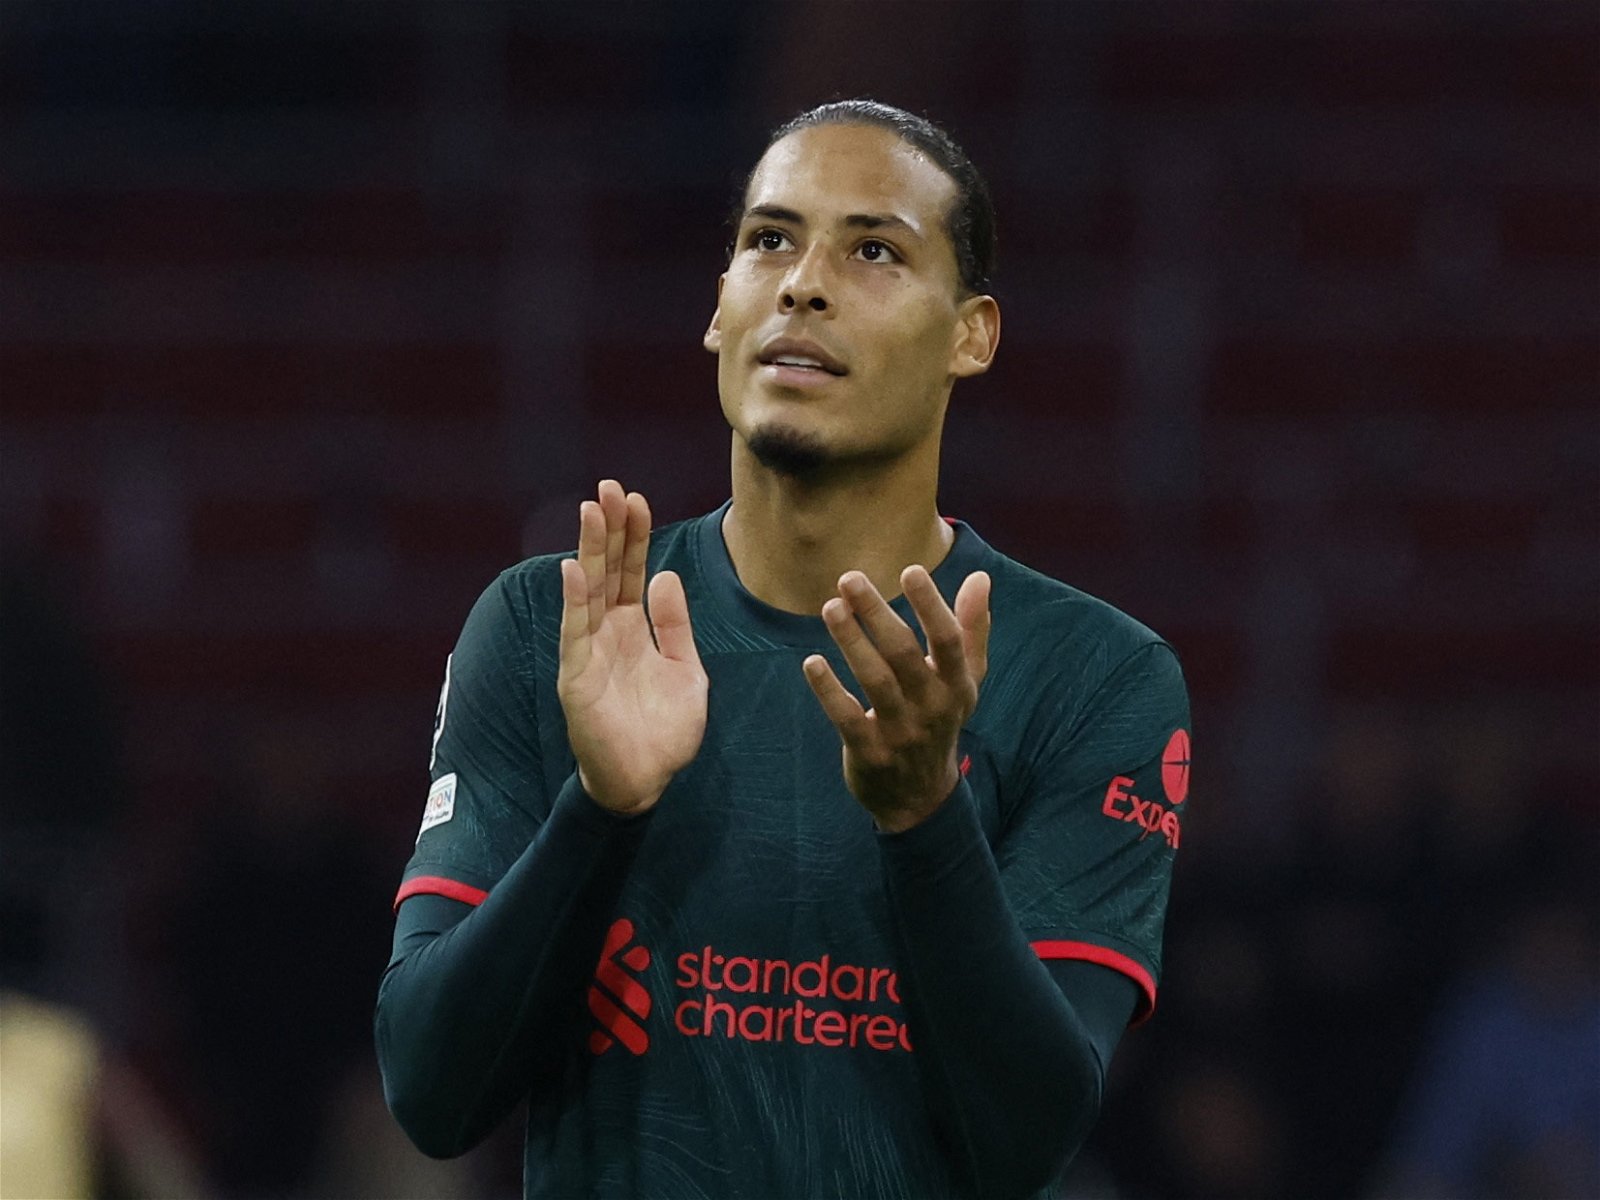 Virgil Van Dijk - Netherlands Players To Watch Out For At World Cup